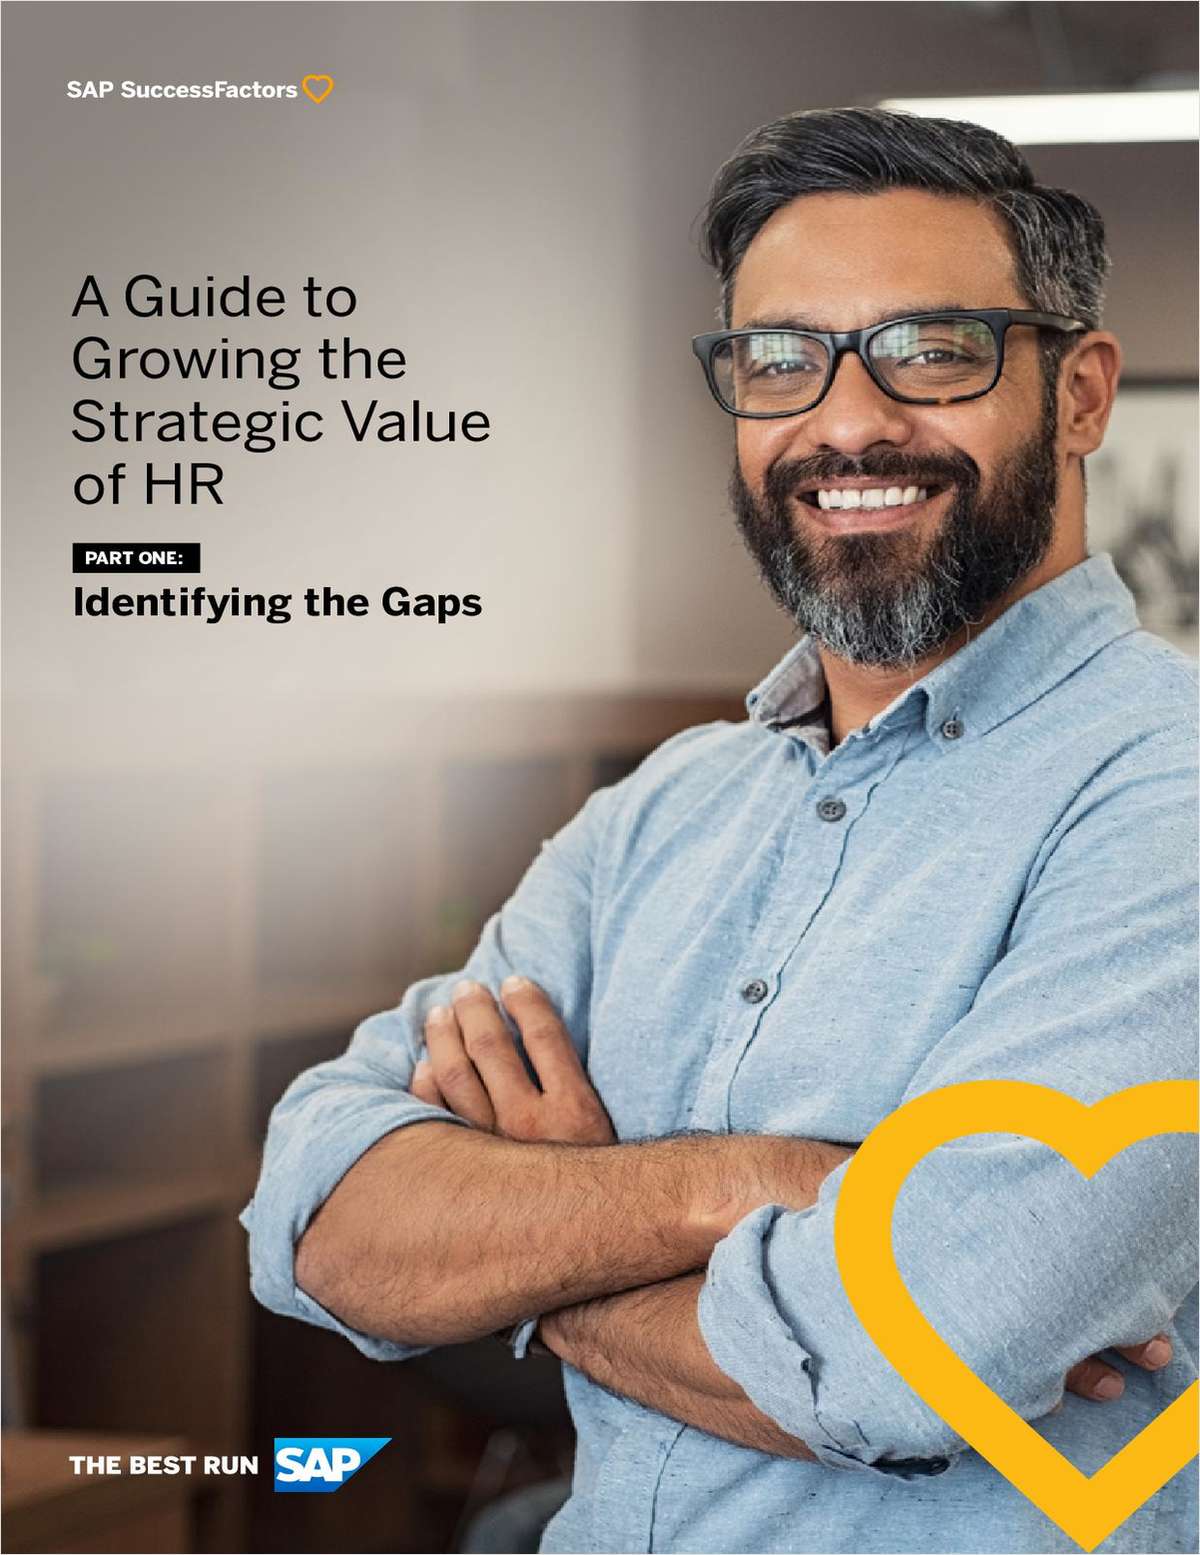 A Guide to Growing the Strategic Value of HR - Part 1